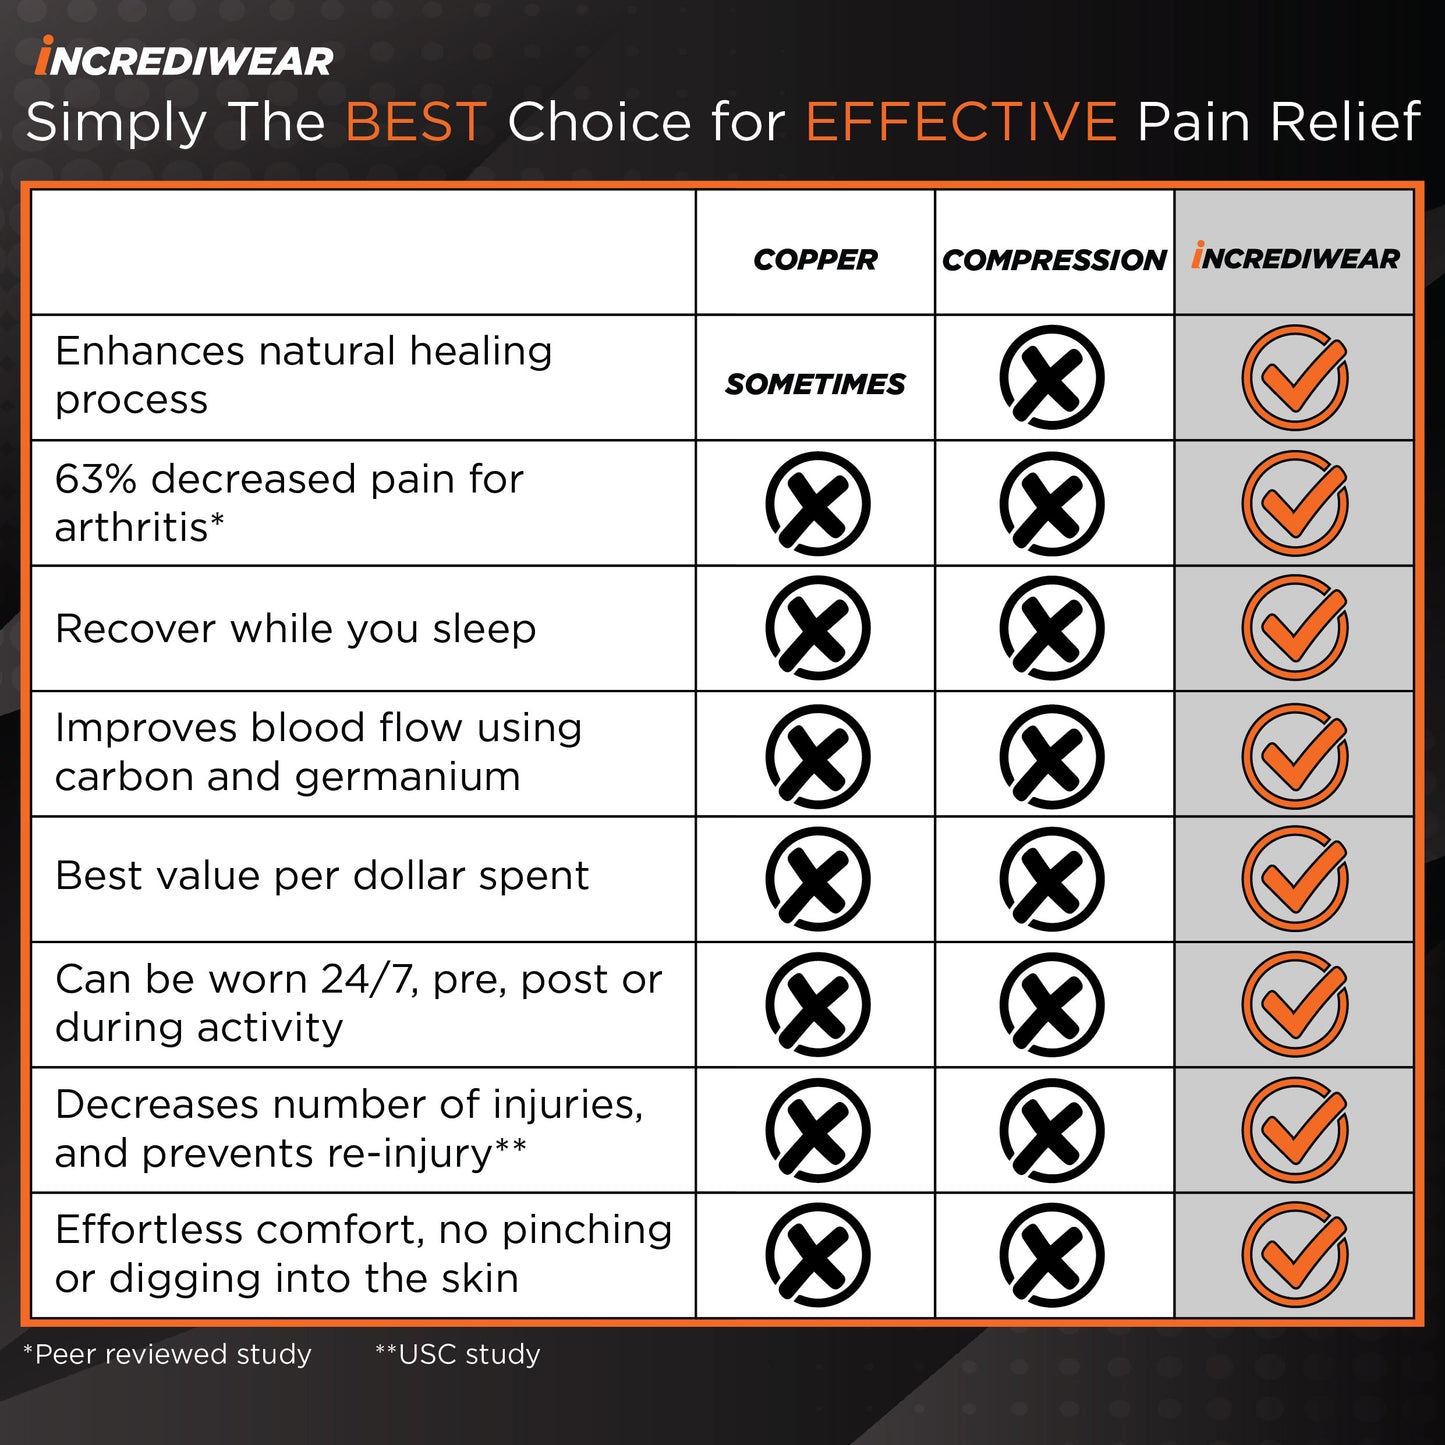 incrediwear comparison chart for effective pain relief